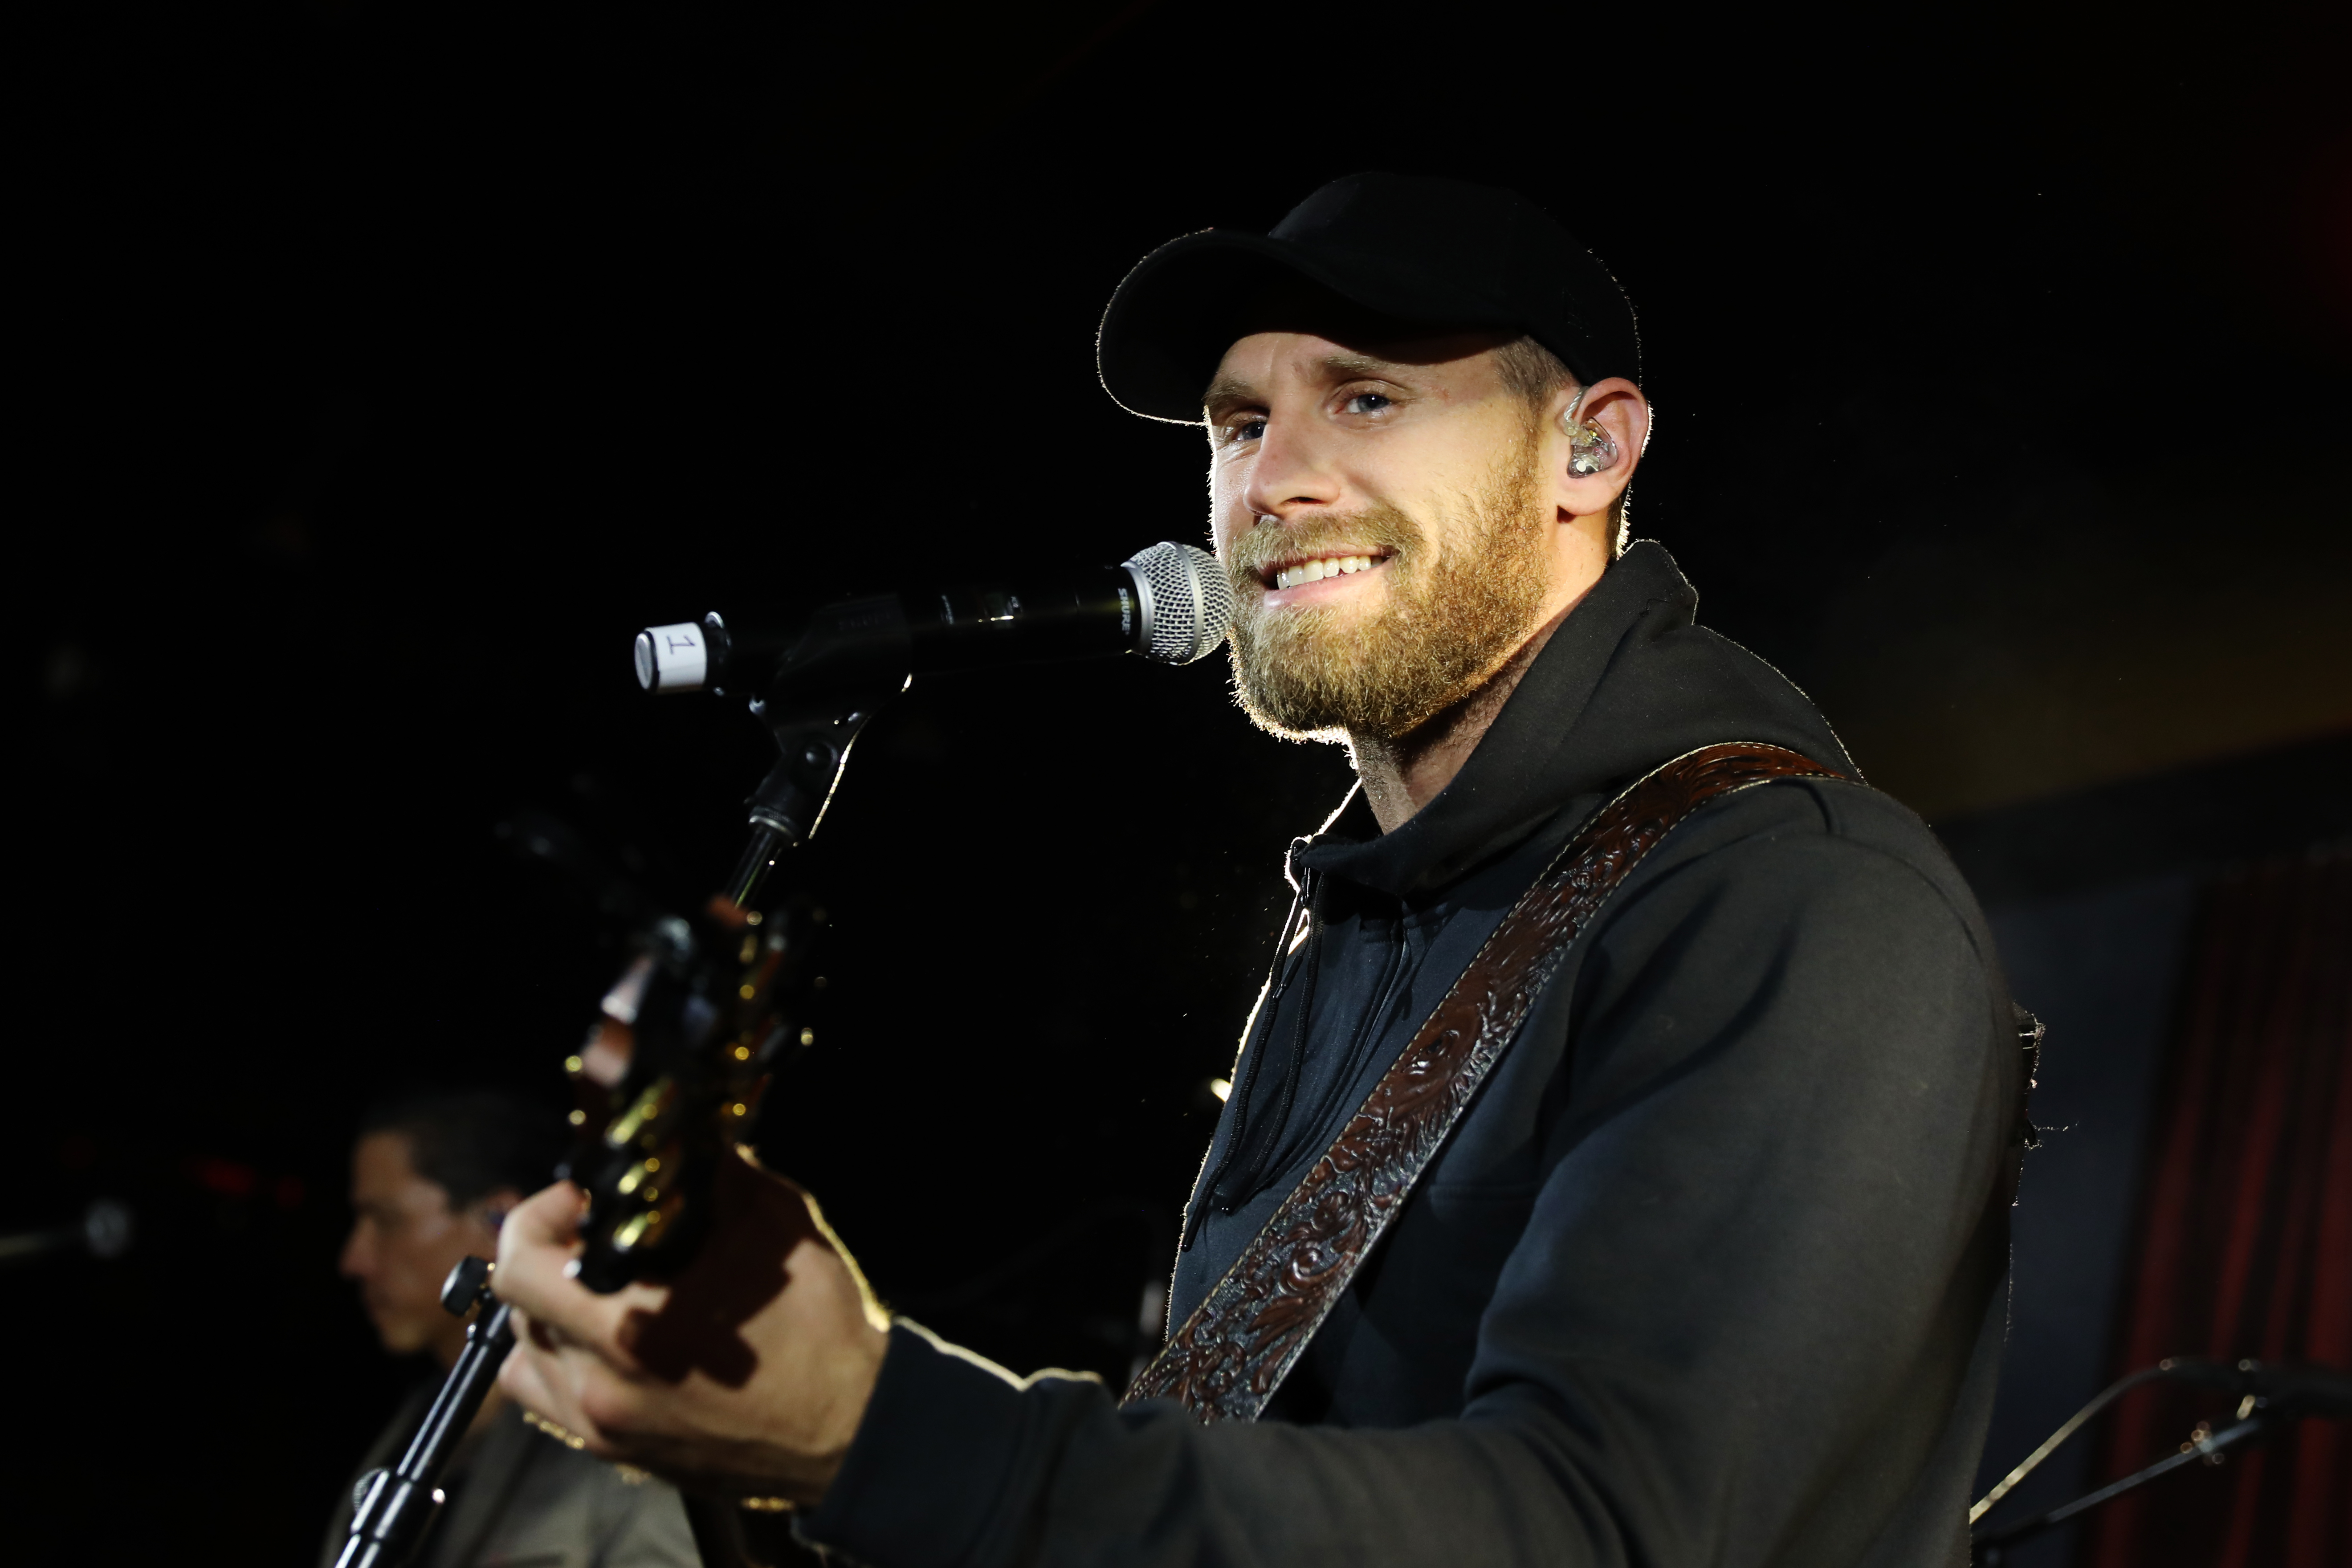 Chase Rice performs at the 10th Annual BBR Music Group Pre-CMA Party at the Cambria Hotel Nashville on November 12, 2019 in Nashville, Tennessee. (Photo by Leah Puttkammer/Getty Images for BBR Music Group)